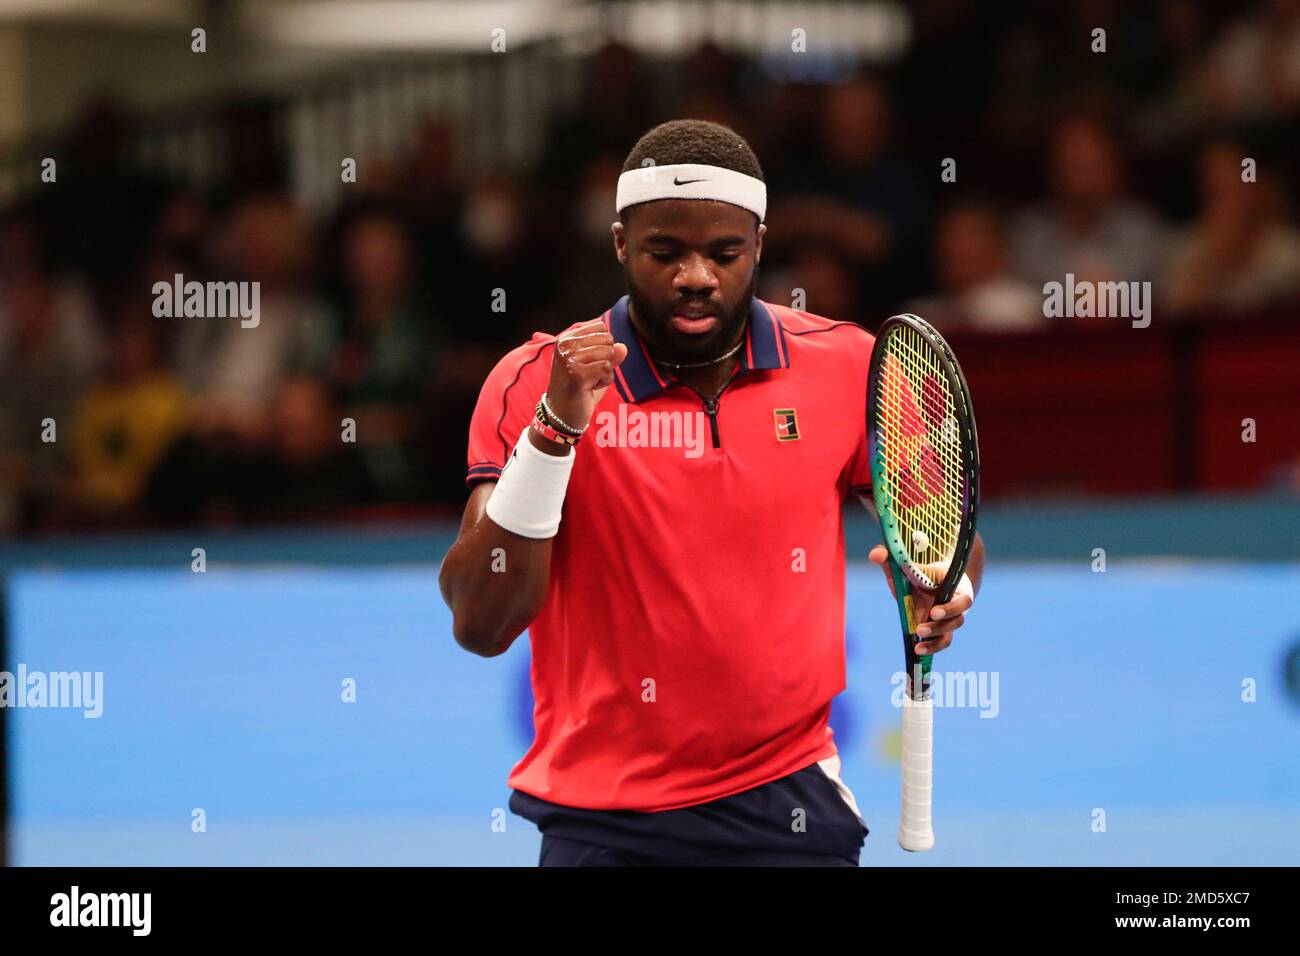 Frances Tiafoe of the United States celebrates during his semi final match against Jannik Sinner of Italy during the Erste Bank Open ATP tennis tournament in Vienna, Austria, Saturday, Oct